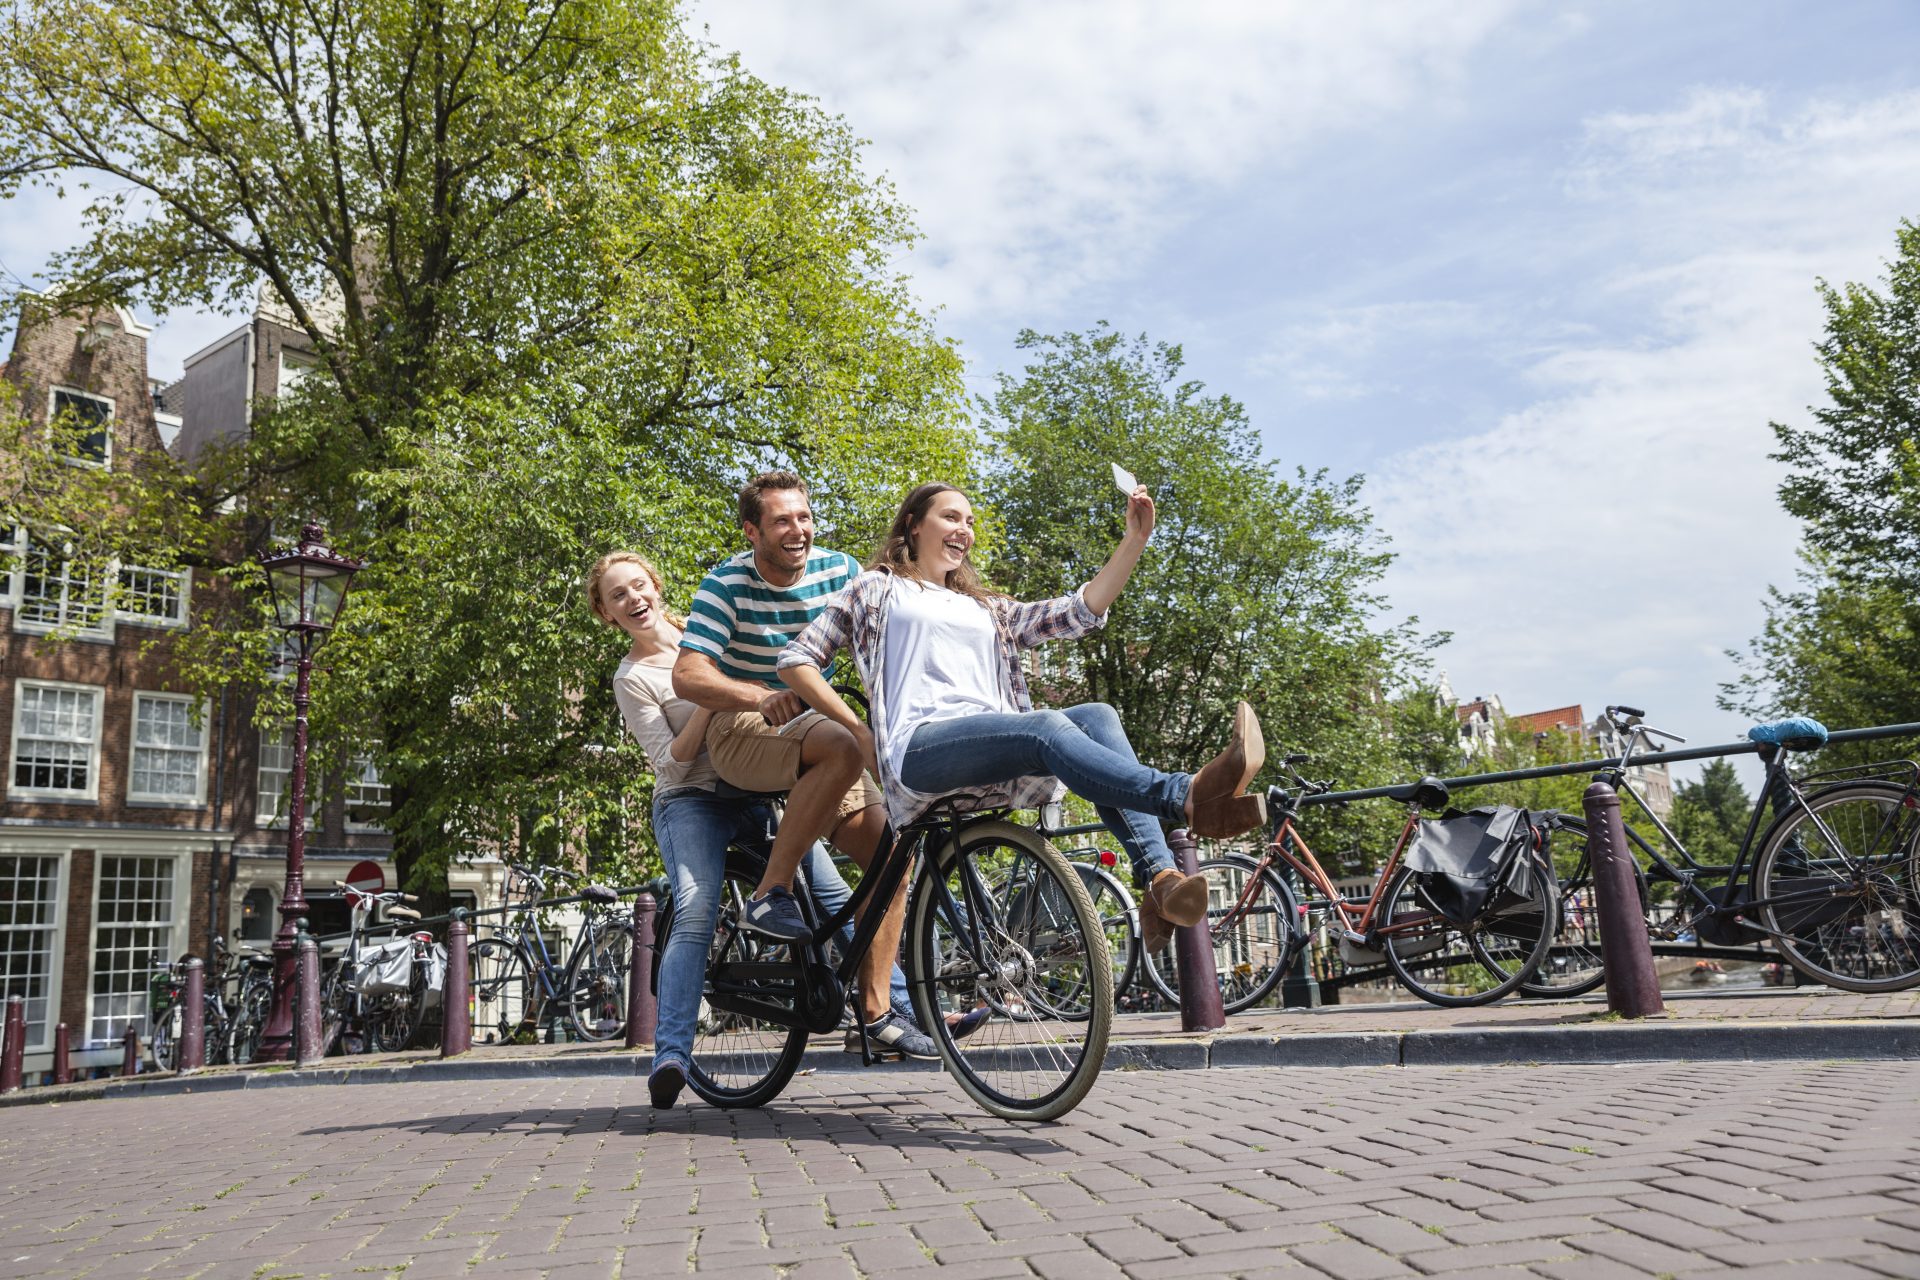 In pictures: Why The Netherlands is a cycling paradise